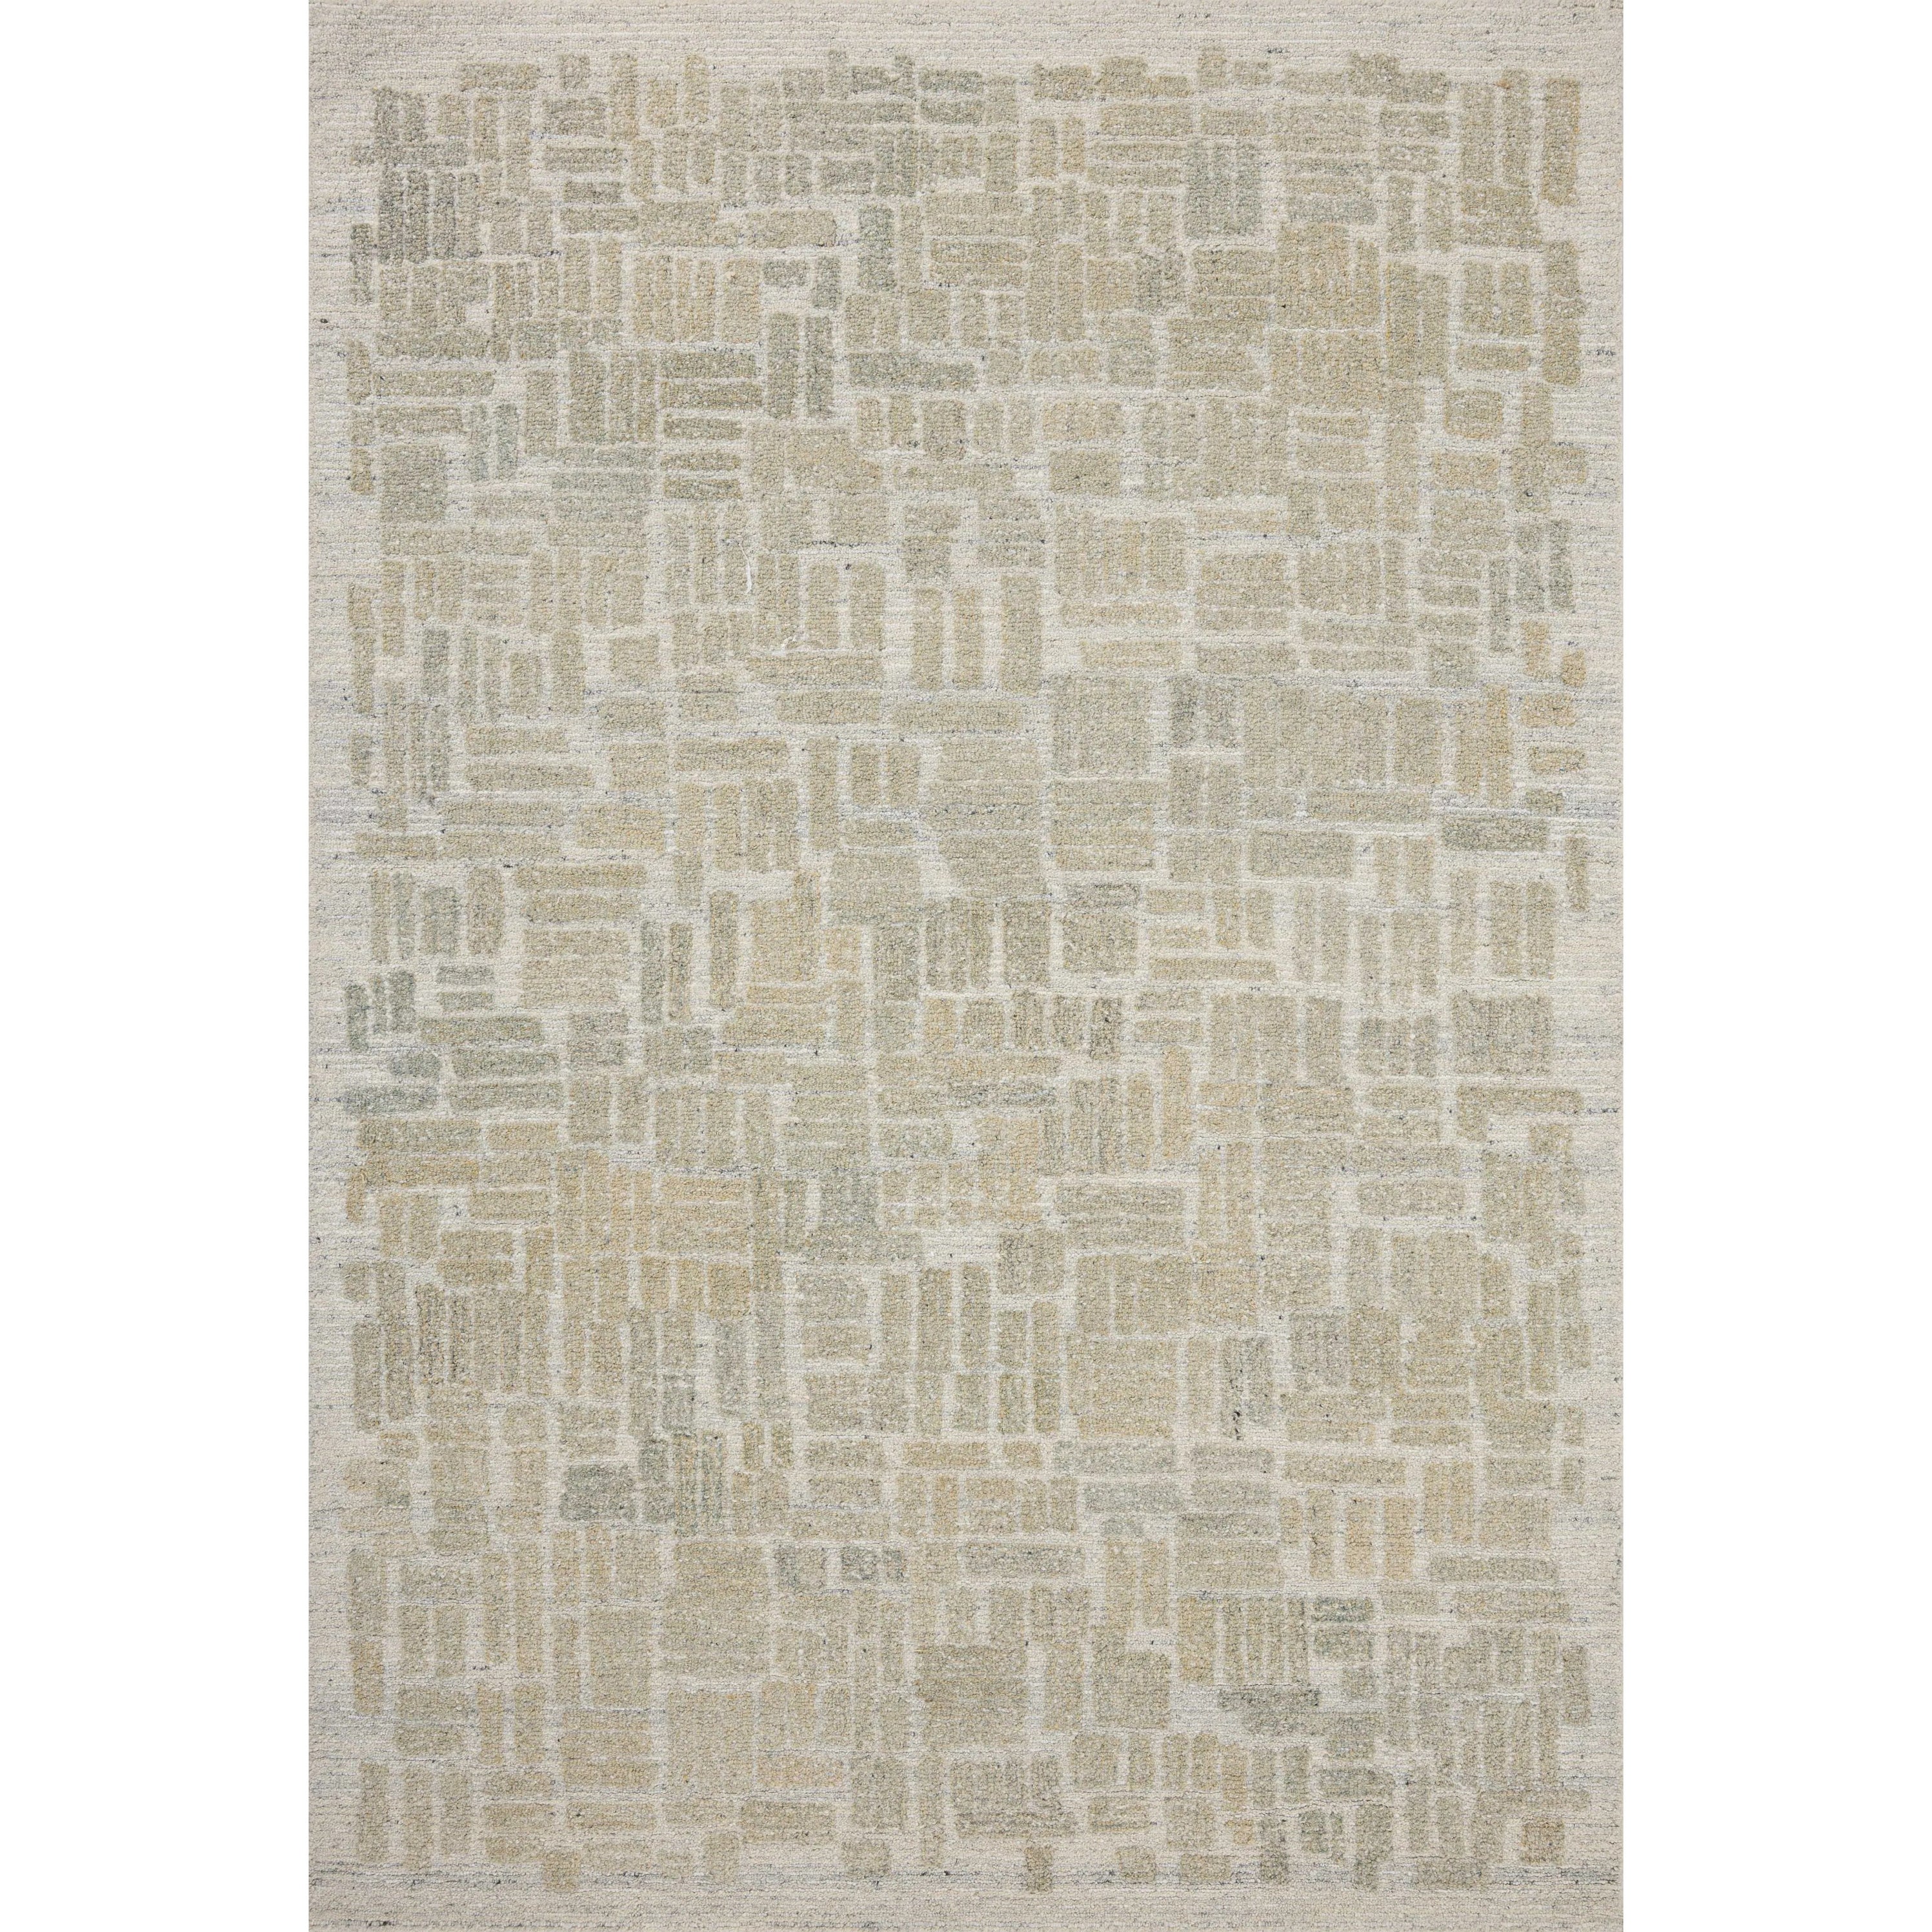 The Elias Pebble / Sage Rug is a hand-tufted wool area rug with lively graphic patterns in earth and stone tones. There’s a unique texture to the rug made by over-tufting, in which a design is hand-tufted over a tufted base, creating a subtle high-low pile. Amethyst Home provides interior design, new home construction design consulting, vintage area rugs, and lighting in the Austin metro area.